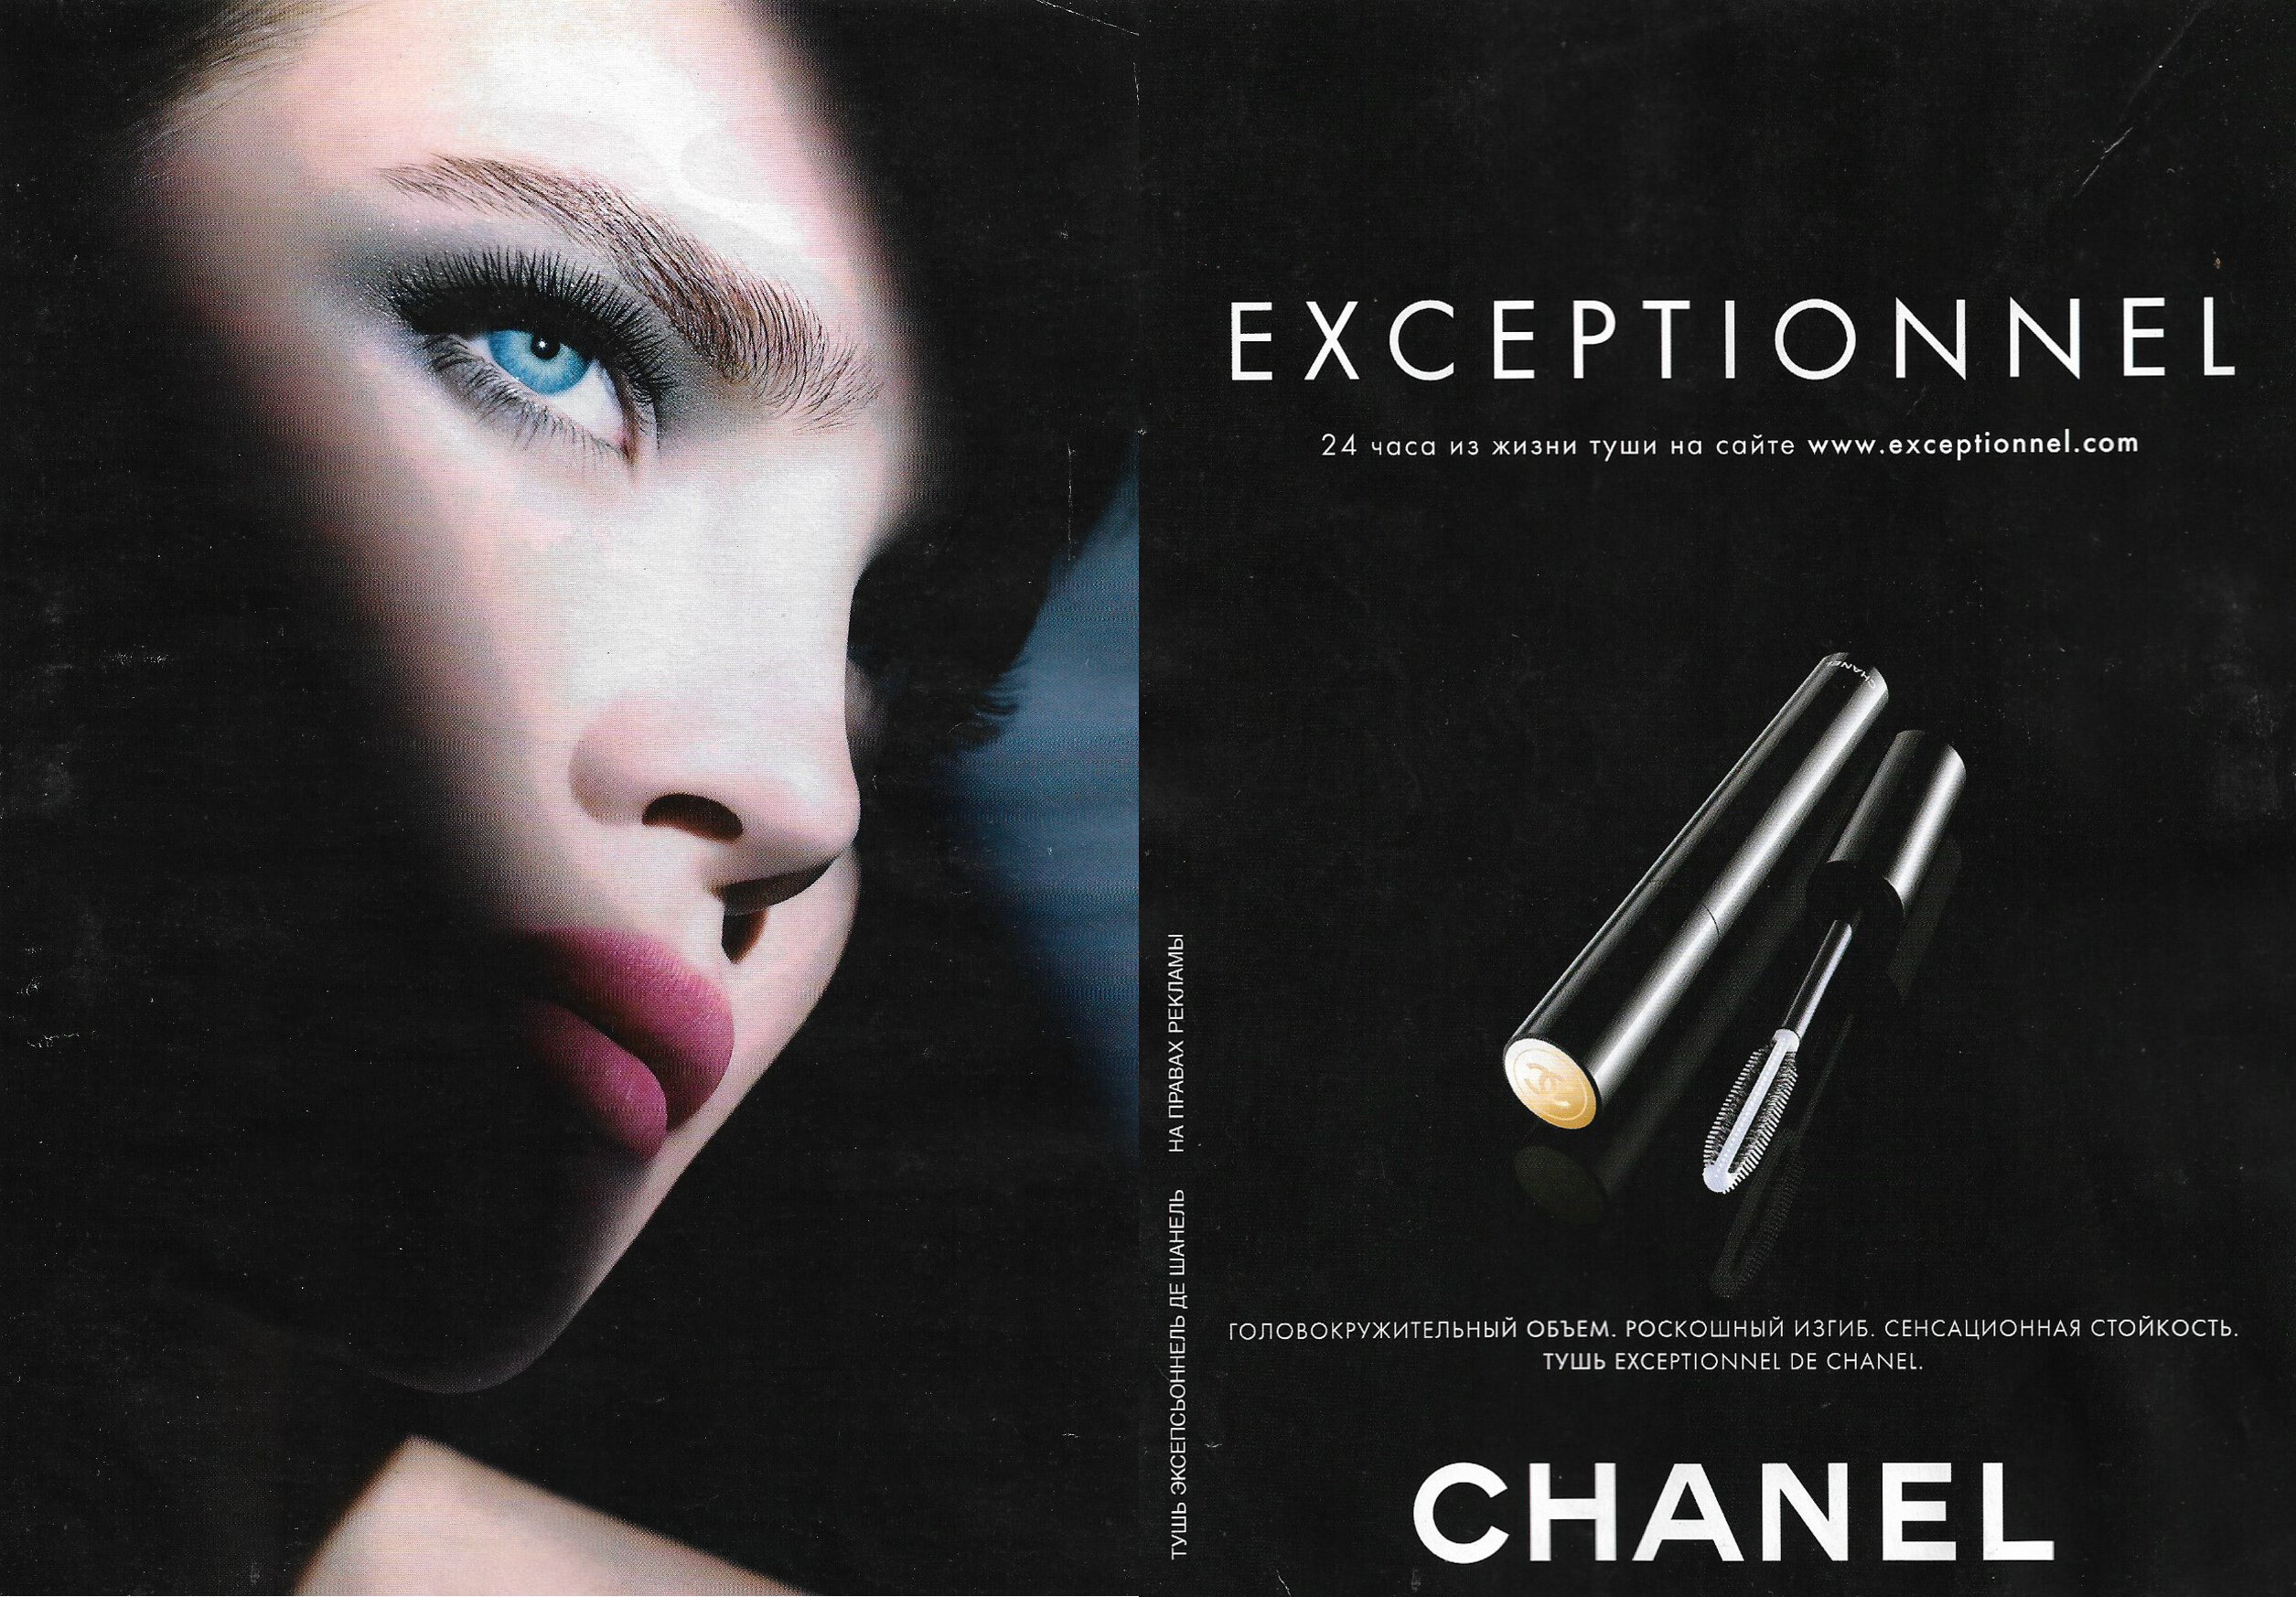 CHANEL Ads - Page 3 - General Discussion - Bellazon